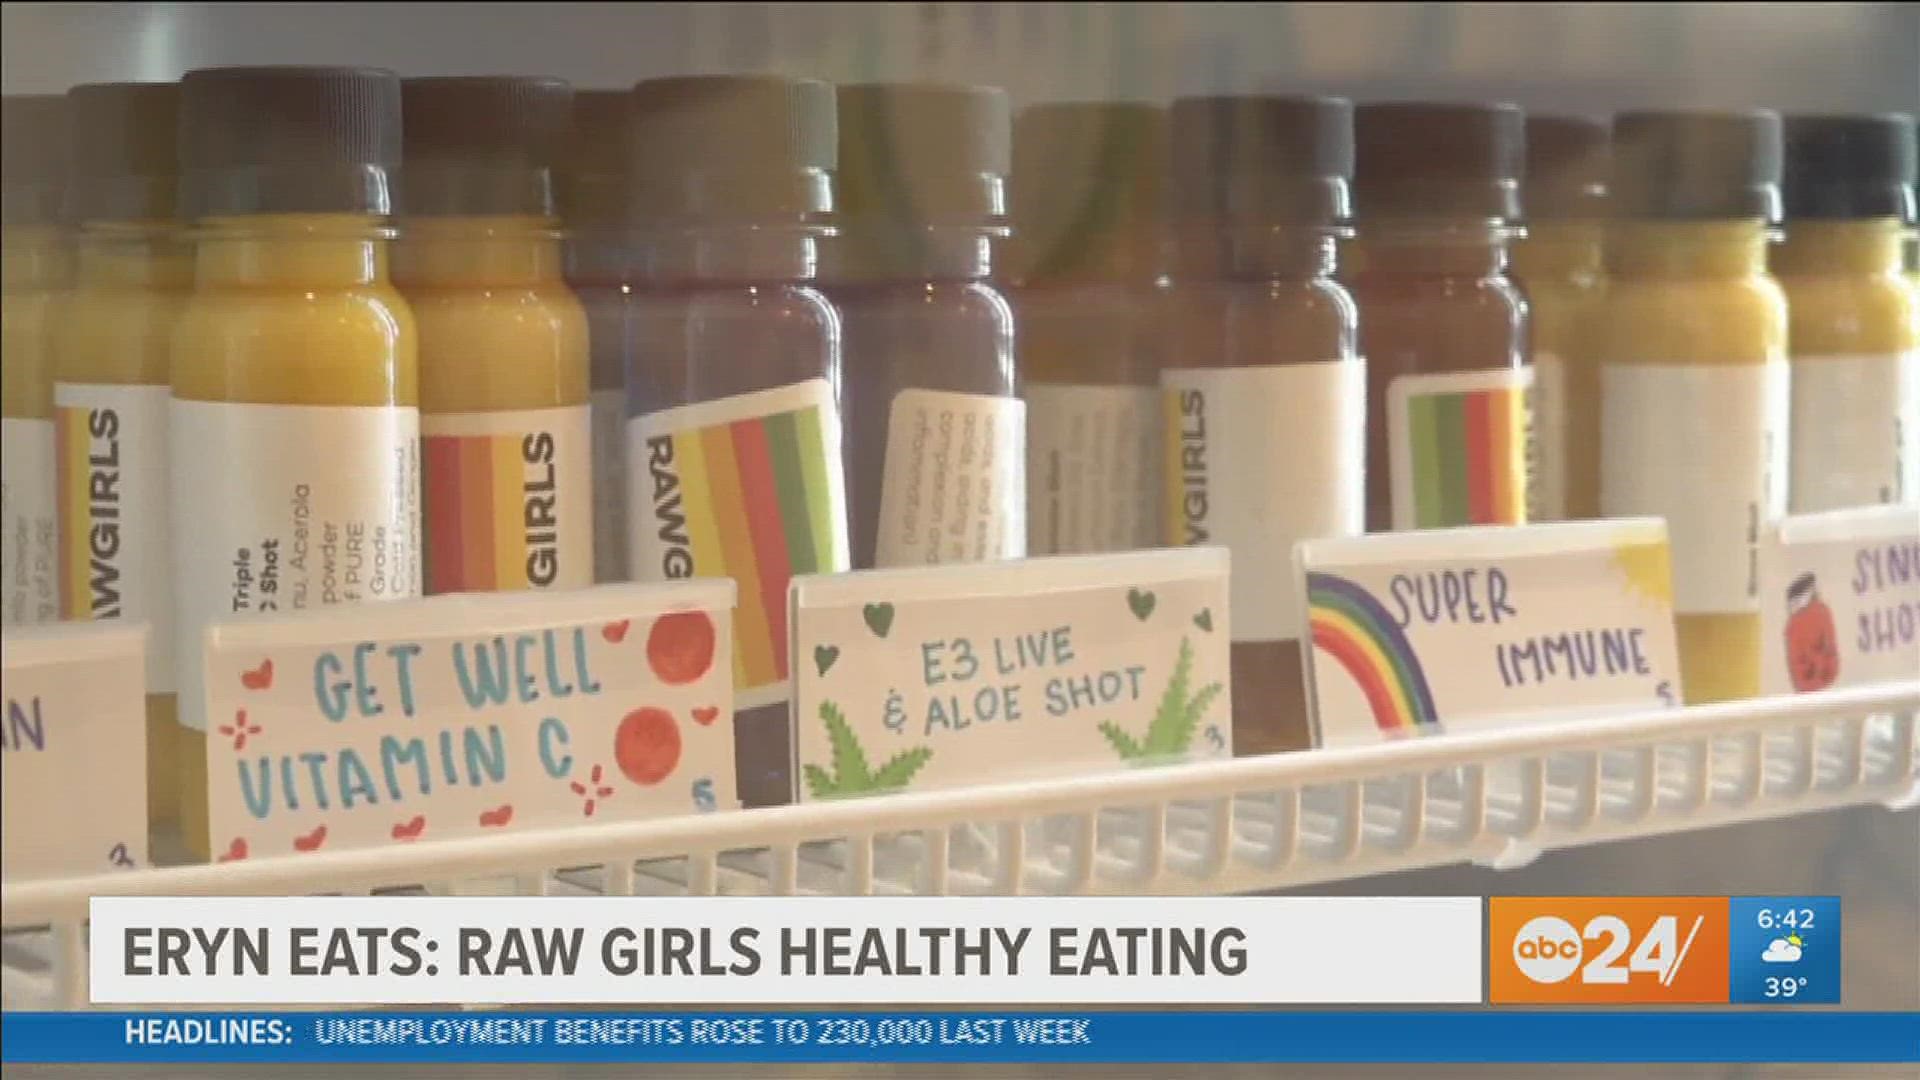 Anchor Eryn Rogers shows us how to stick to our New Year's resolution with healthy eating and juicing at Raw Girls in downtown Memphis.